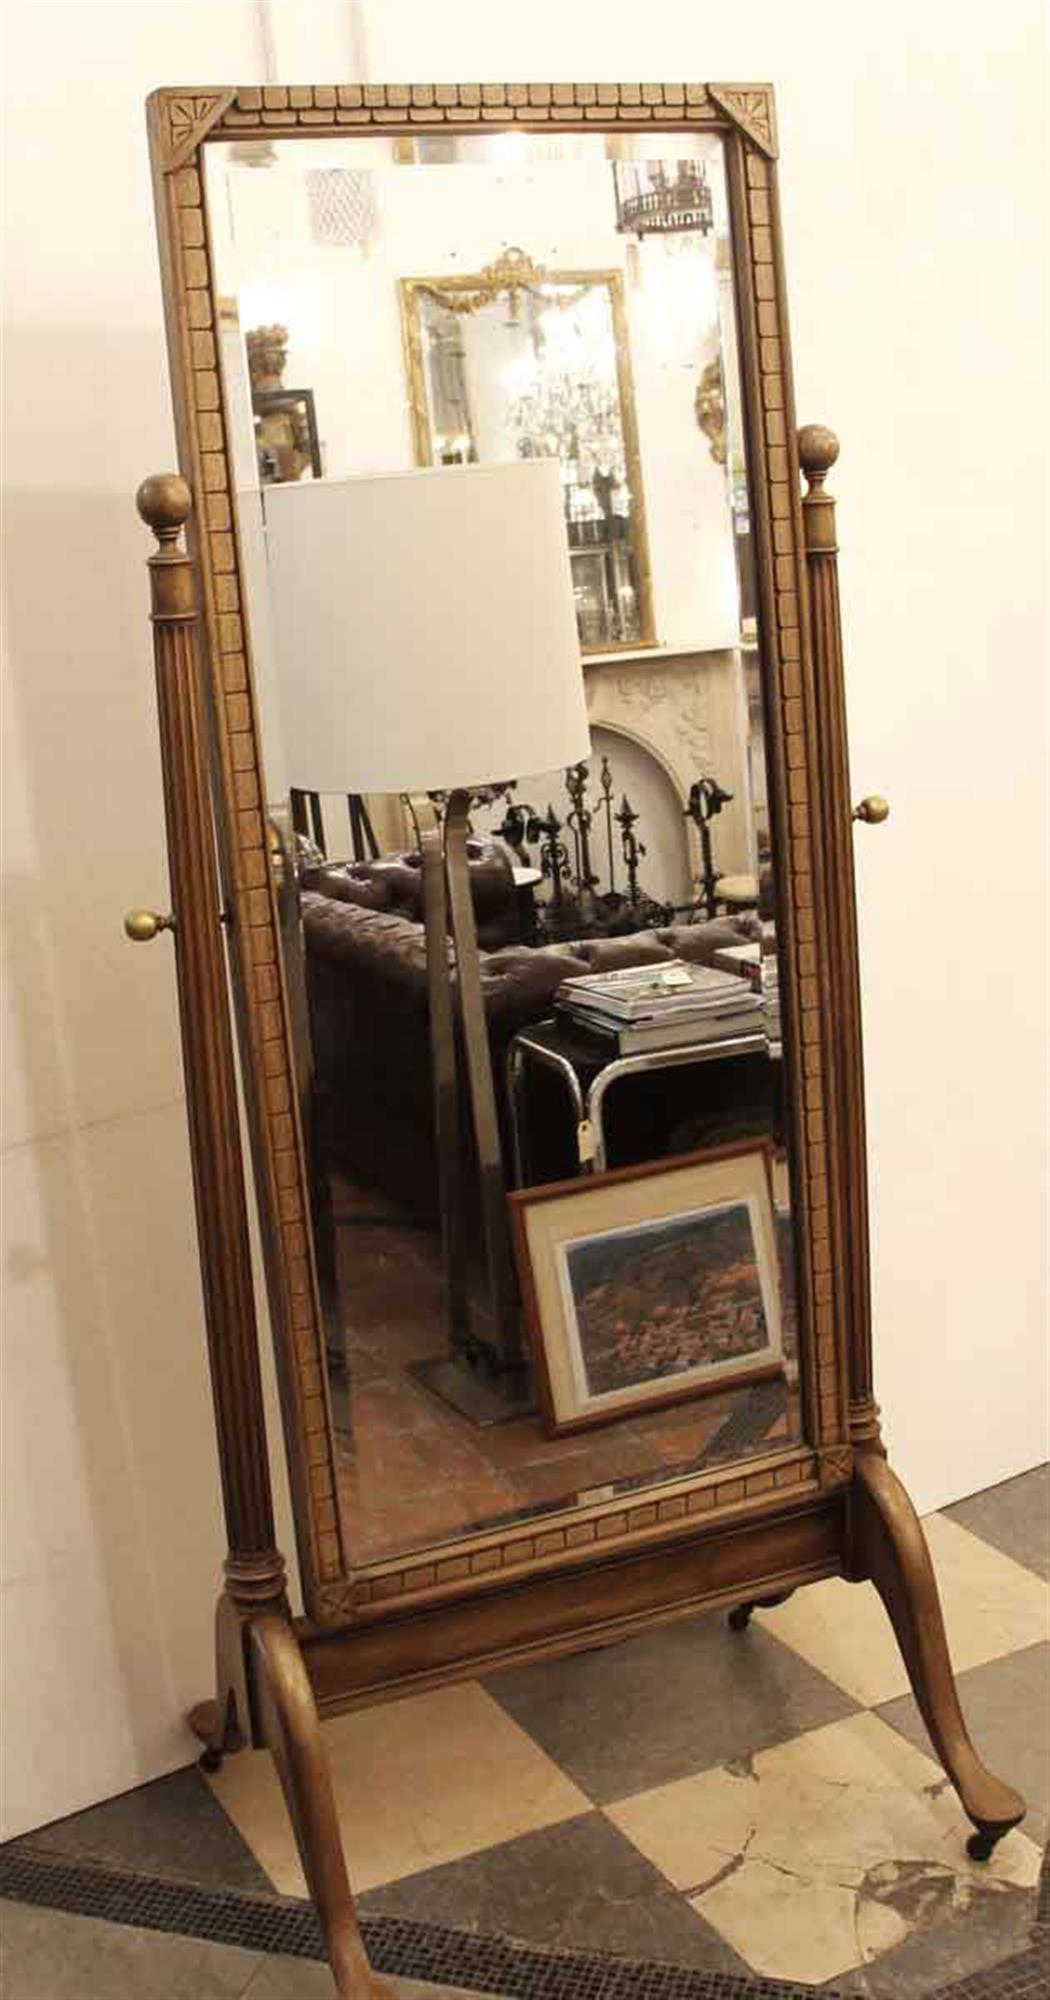 Medium wood tone cheval mirror made of fruitwood with carved details in the Eastlake manner. The decoration is geometric with floral corners with fluted column sides. Brass hardware on sides and furniture wheels. Beveled mirror with slight